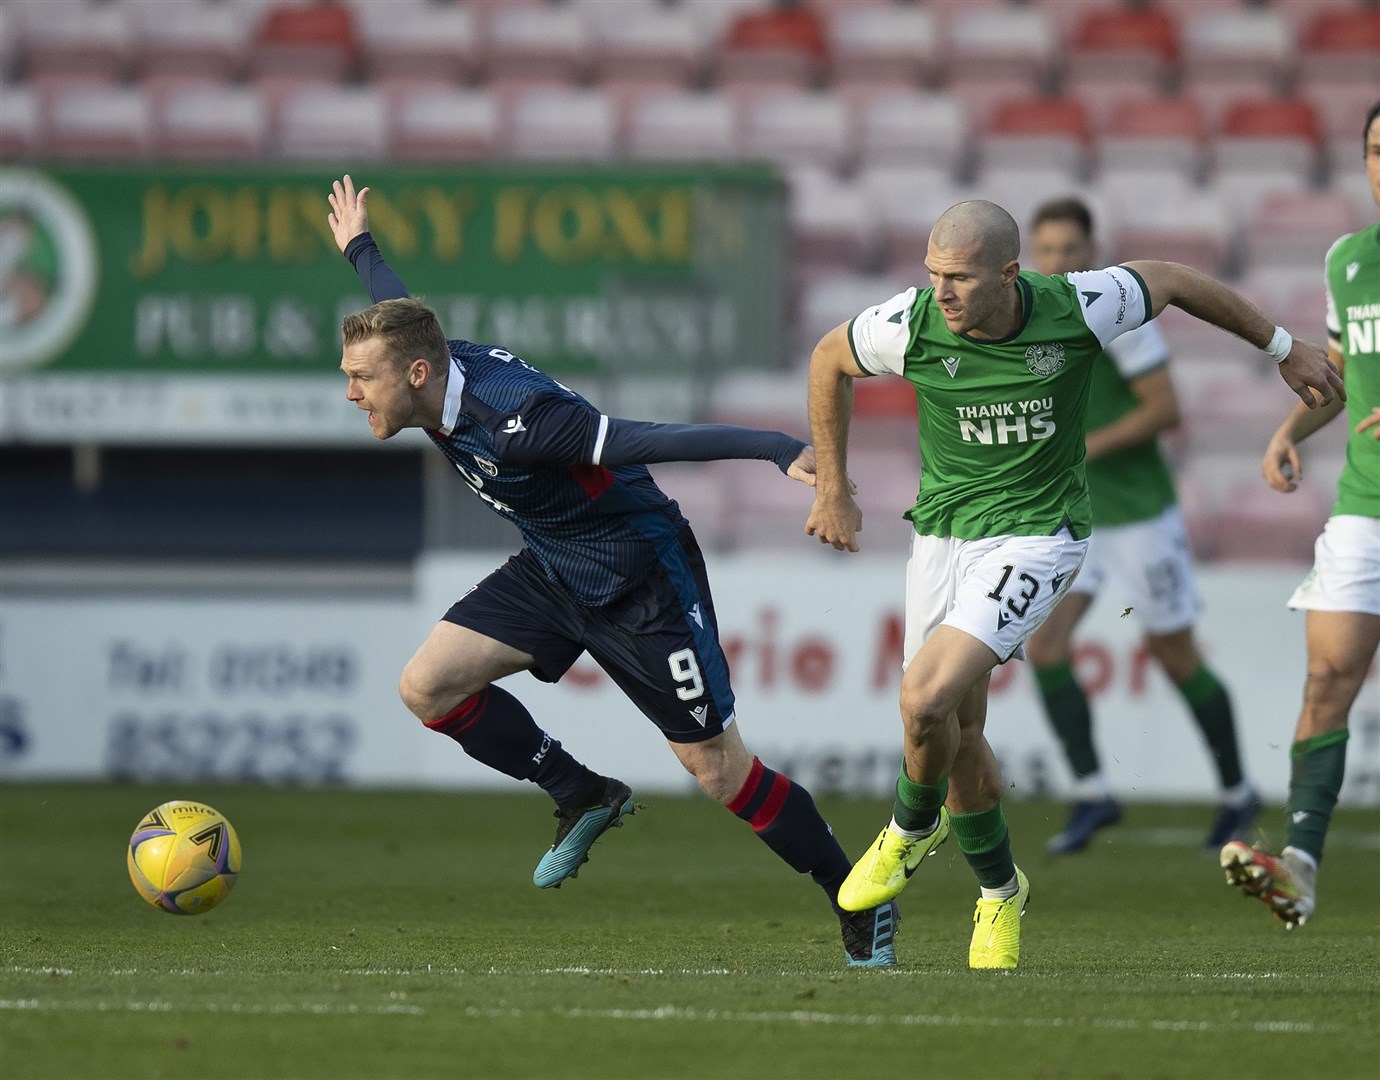 Picture - Ken Macpherson, Inverness. Ross County(0) v Hibs(0). 17.10.20. Ross County's Billy McKay and Hibs’ Alex Gogic.